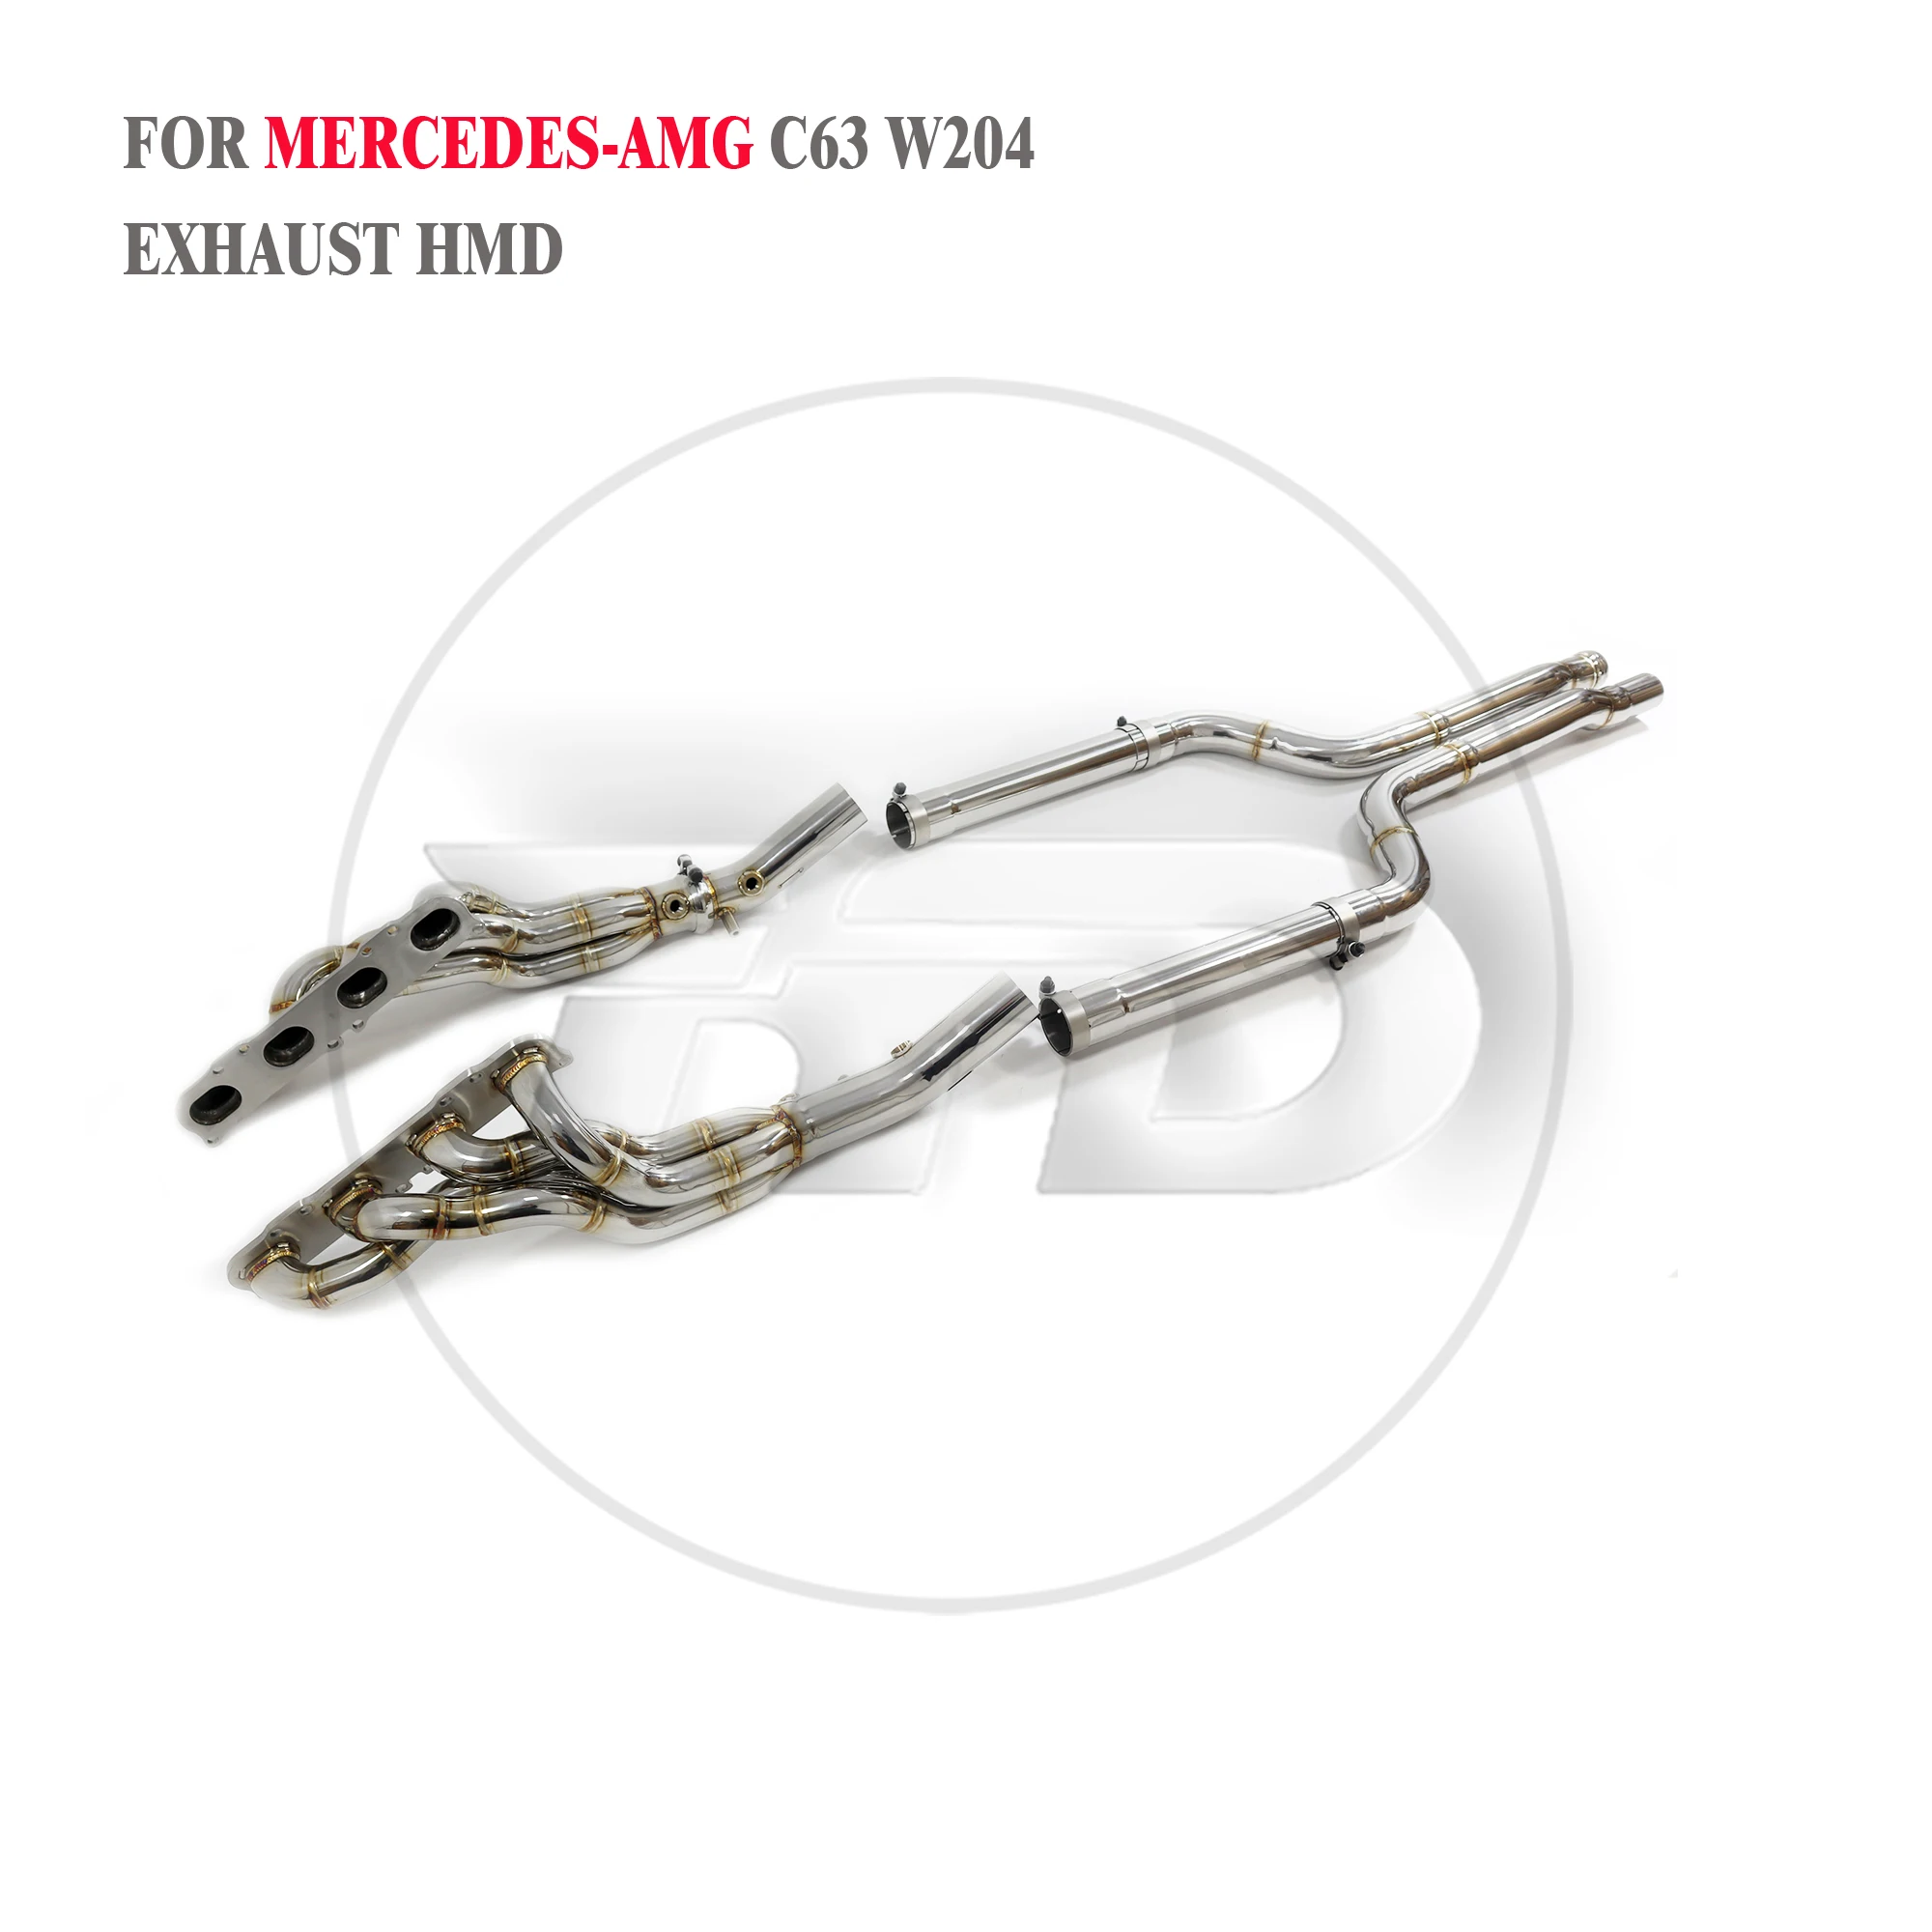 

HMD Exhaust System Performance Manifold for Mercedes Benz AMG C63 W204 6.2L High Flow Headers